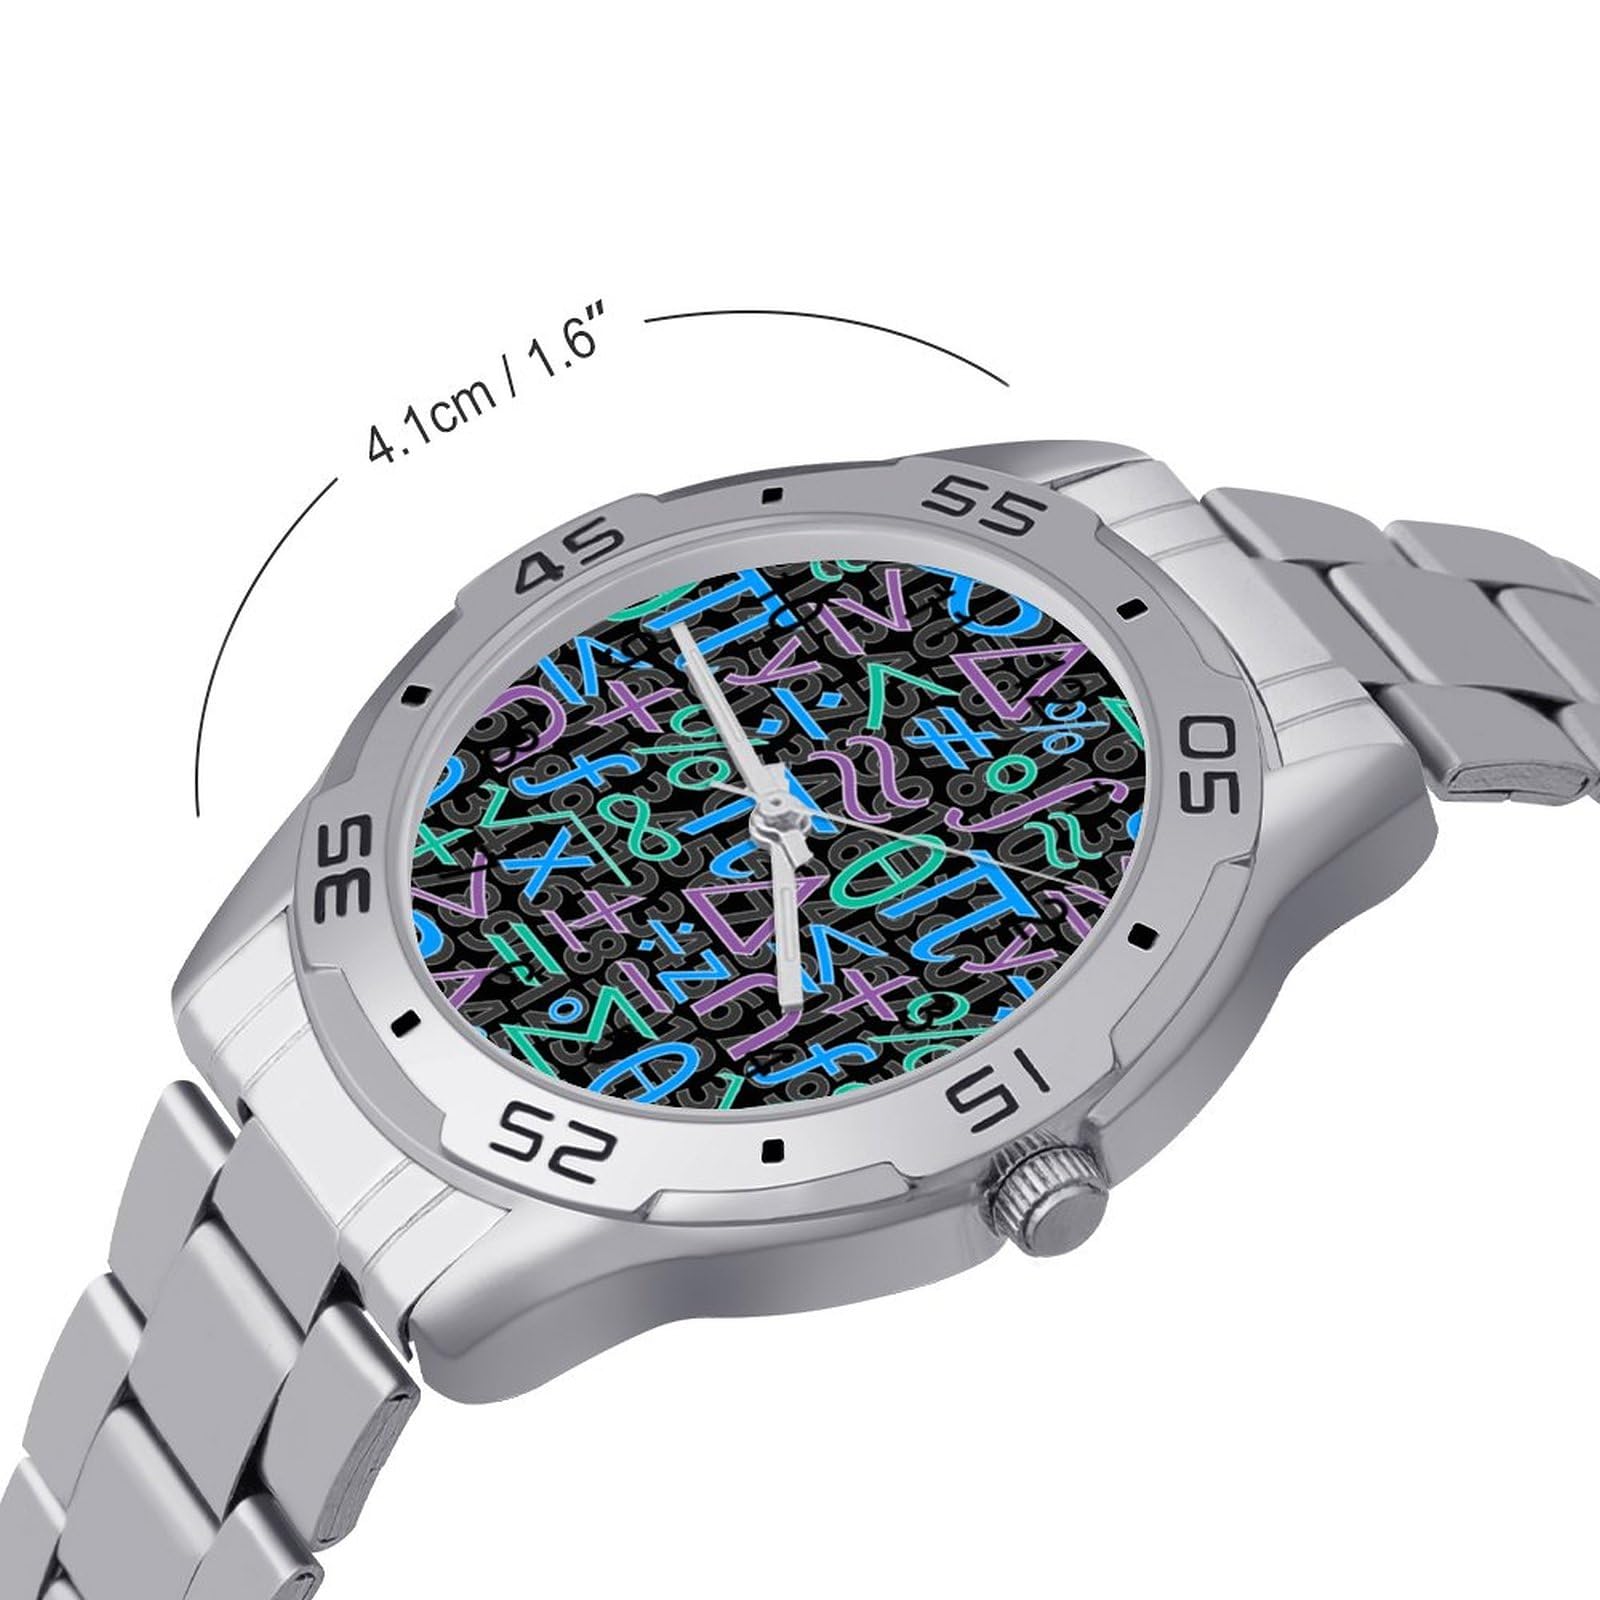 Math Notes Stainless Steel Band Business Watch Dress Wrist Unique Luxury Work Casual Waterproof Watches